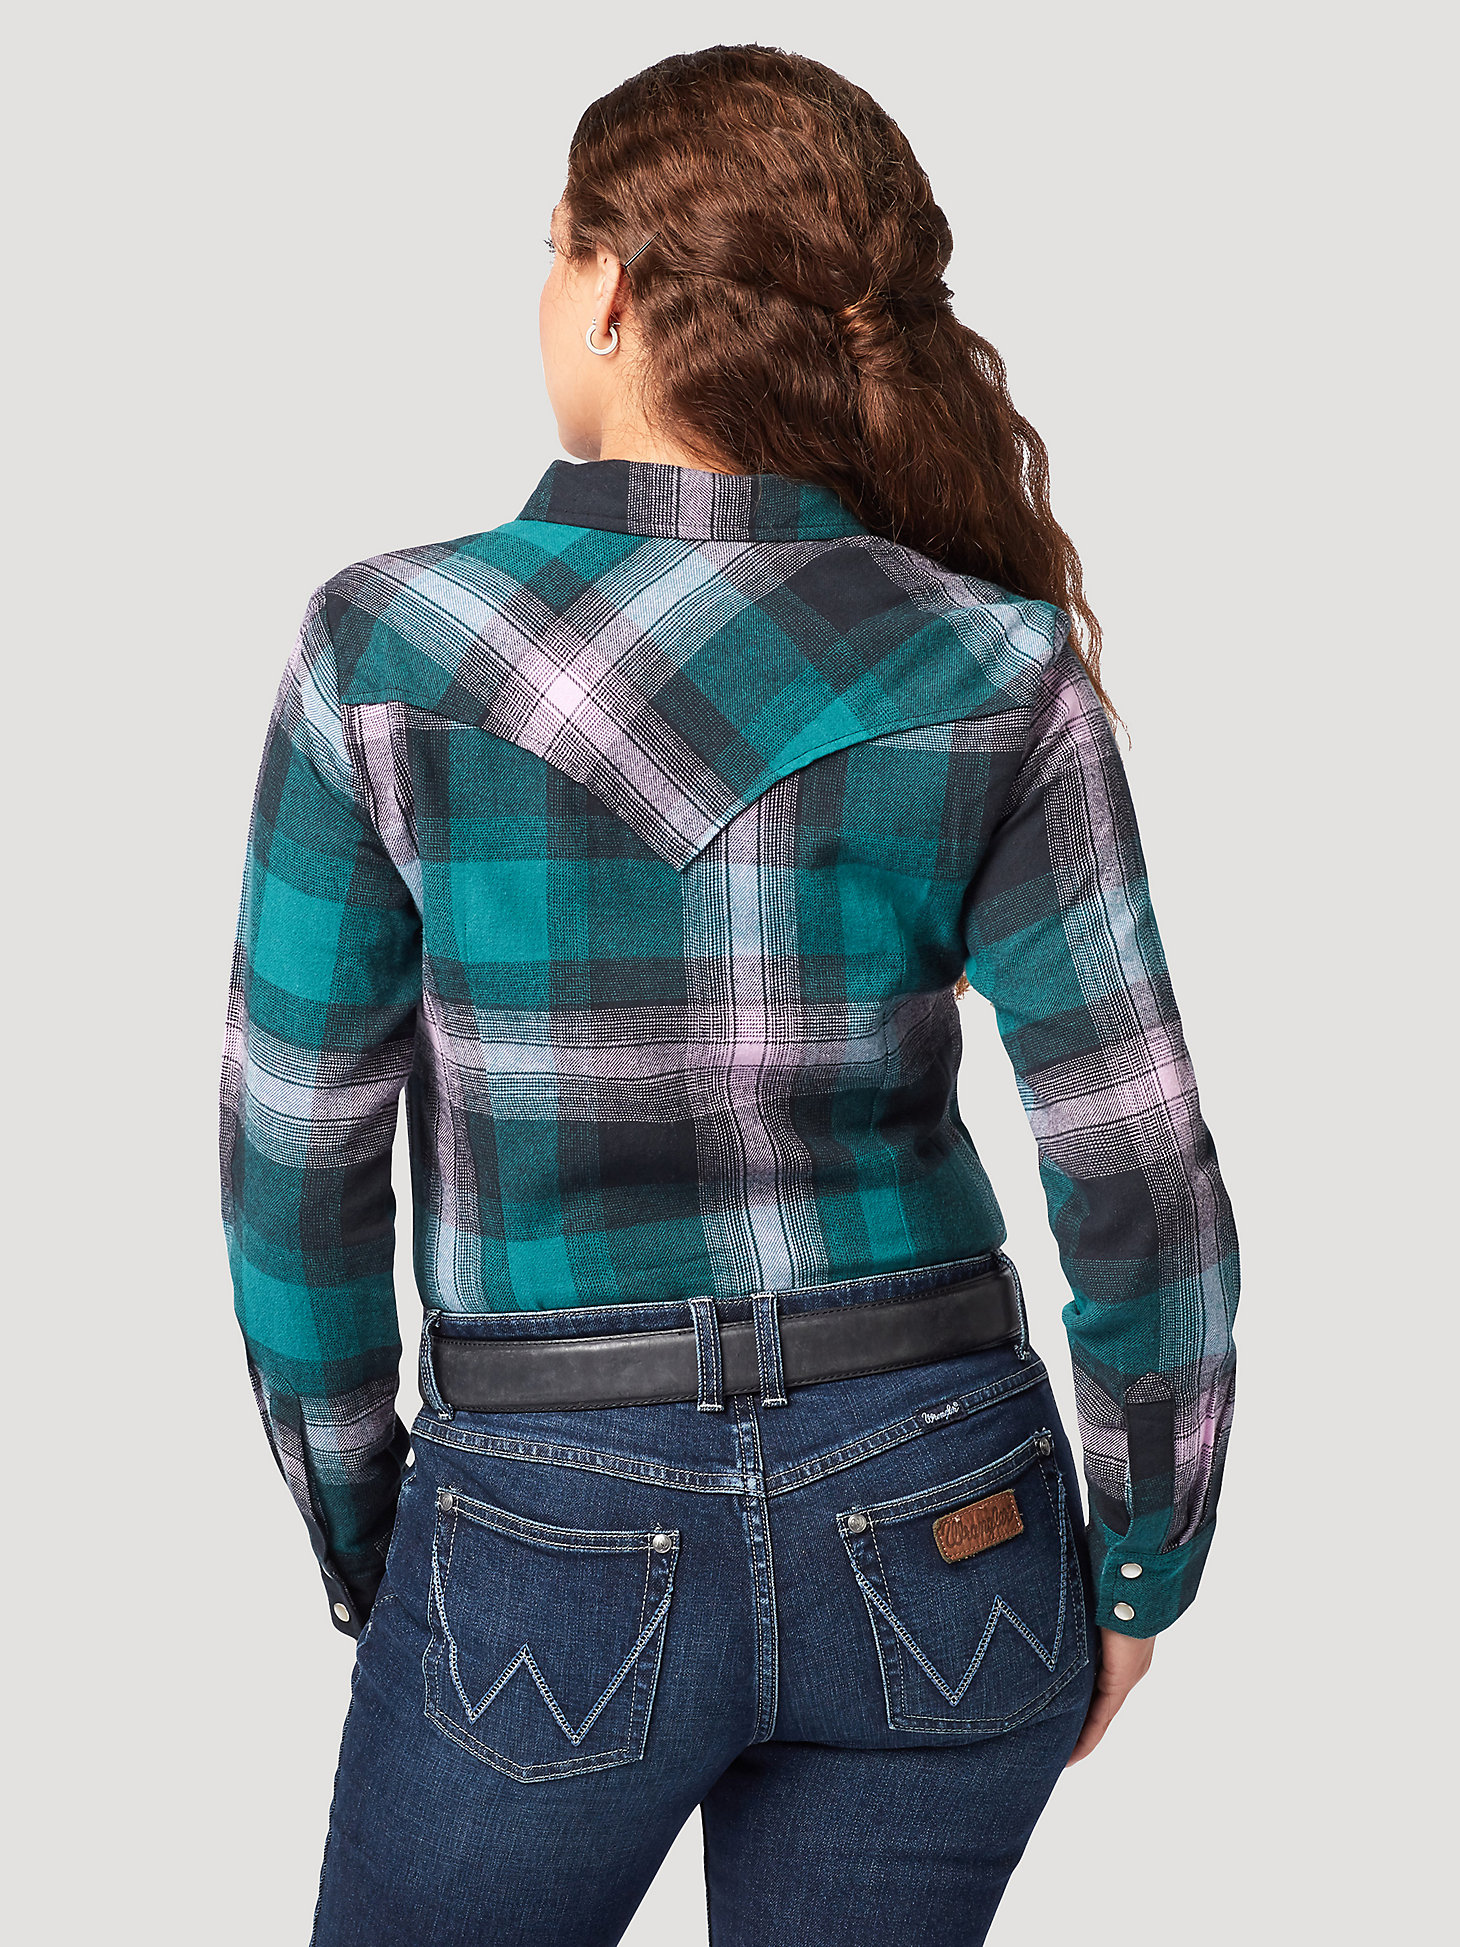 Women's Essential Long Sleeve Flannel Plaid Western Snap Shirt in Calm alternative view 1